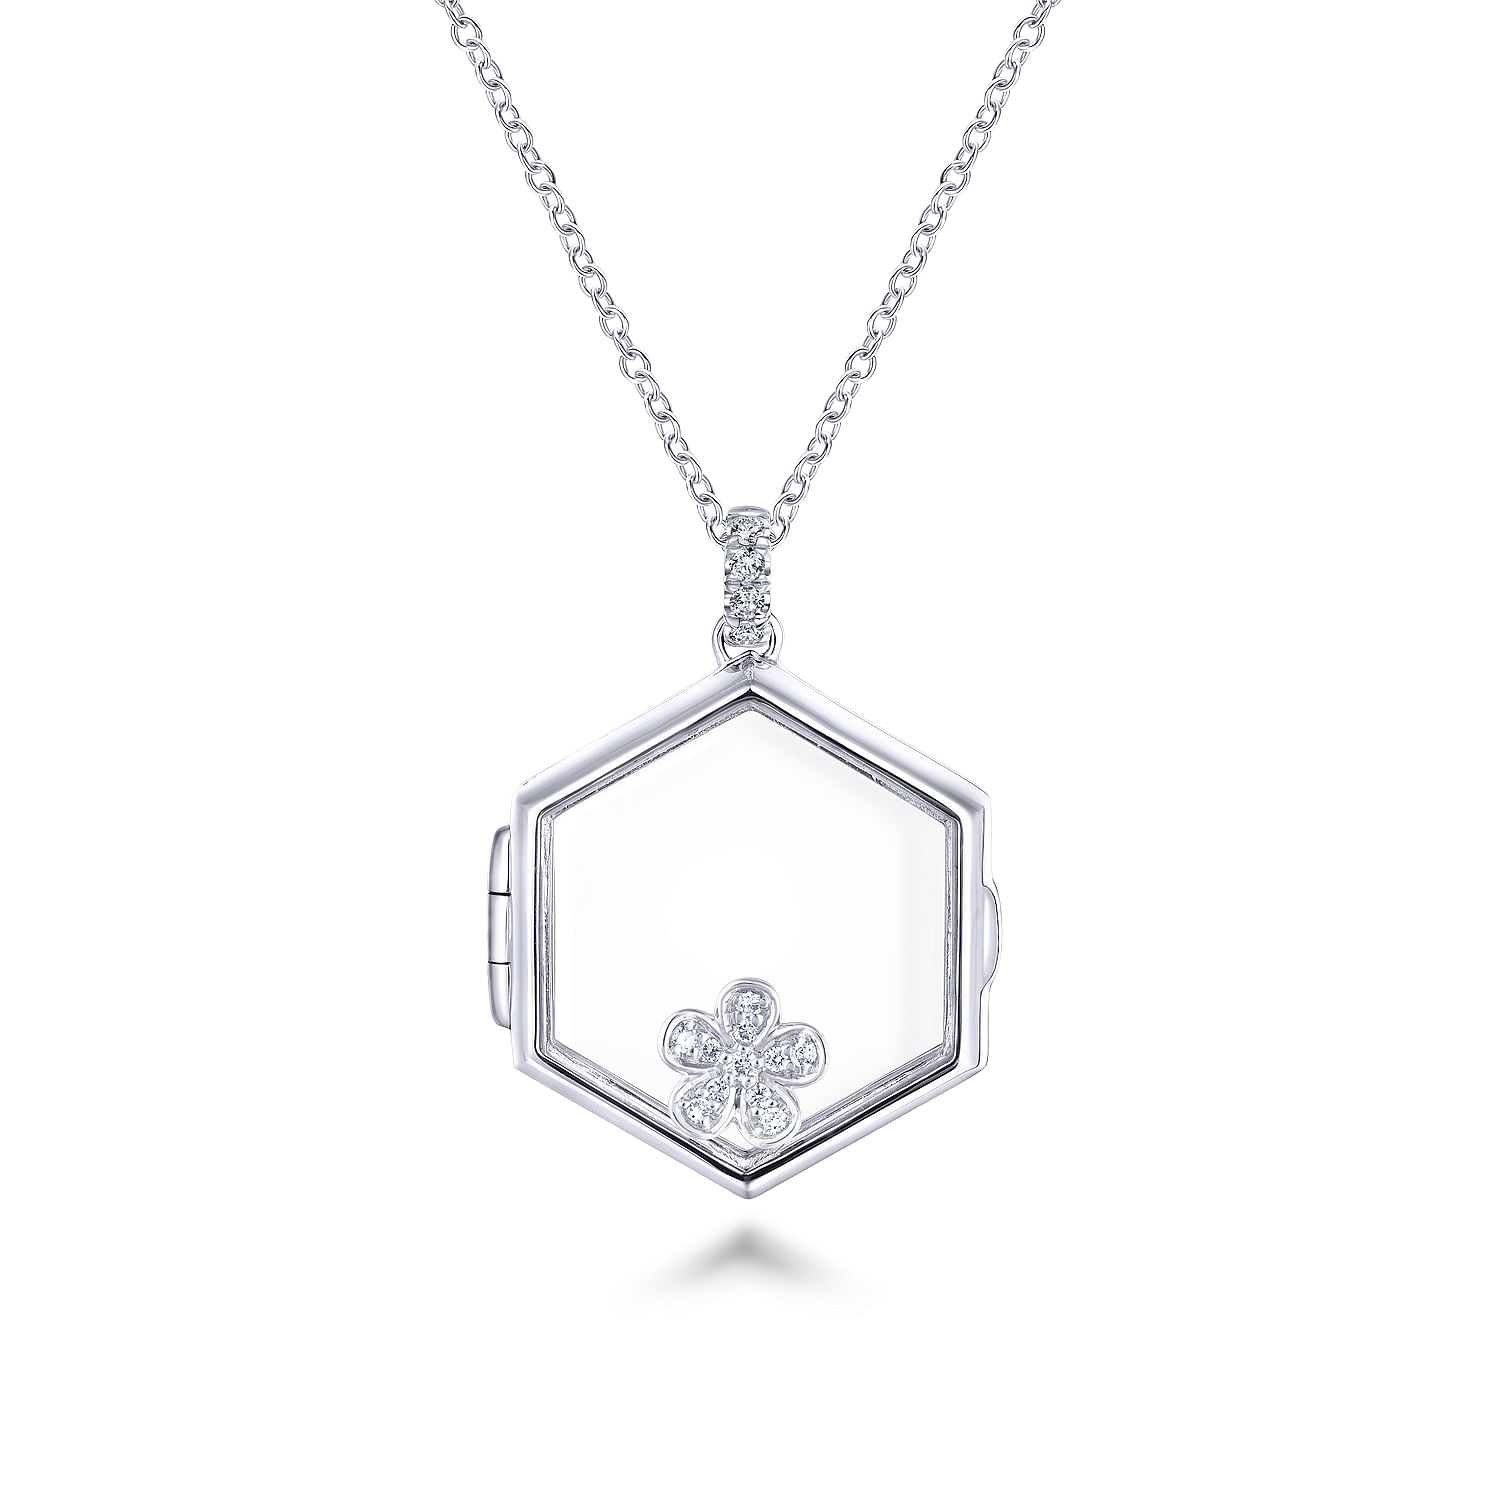 25 inch 14K White Gold Hexagonal Glass Front Locket Necklace